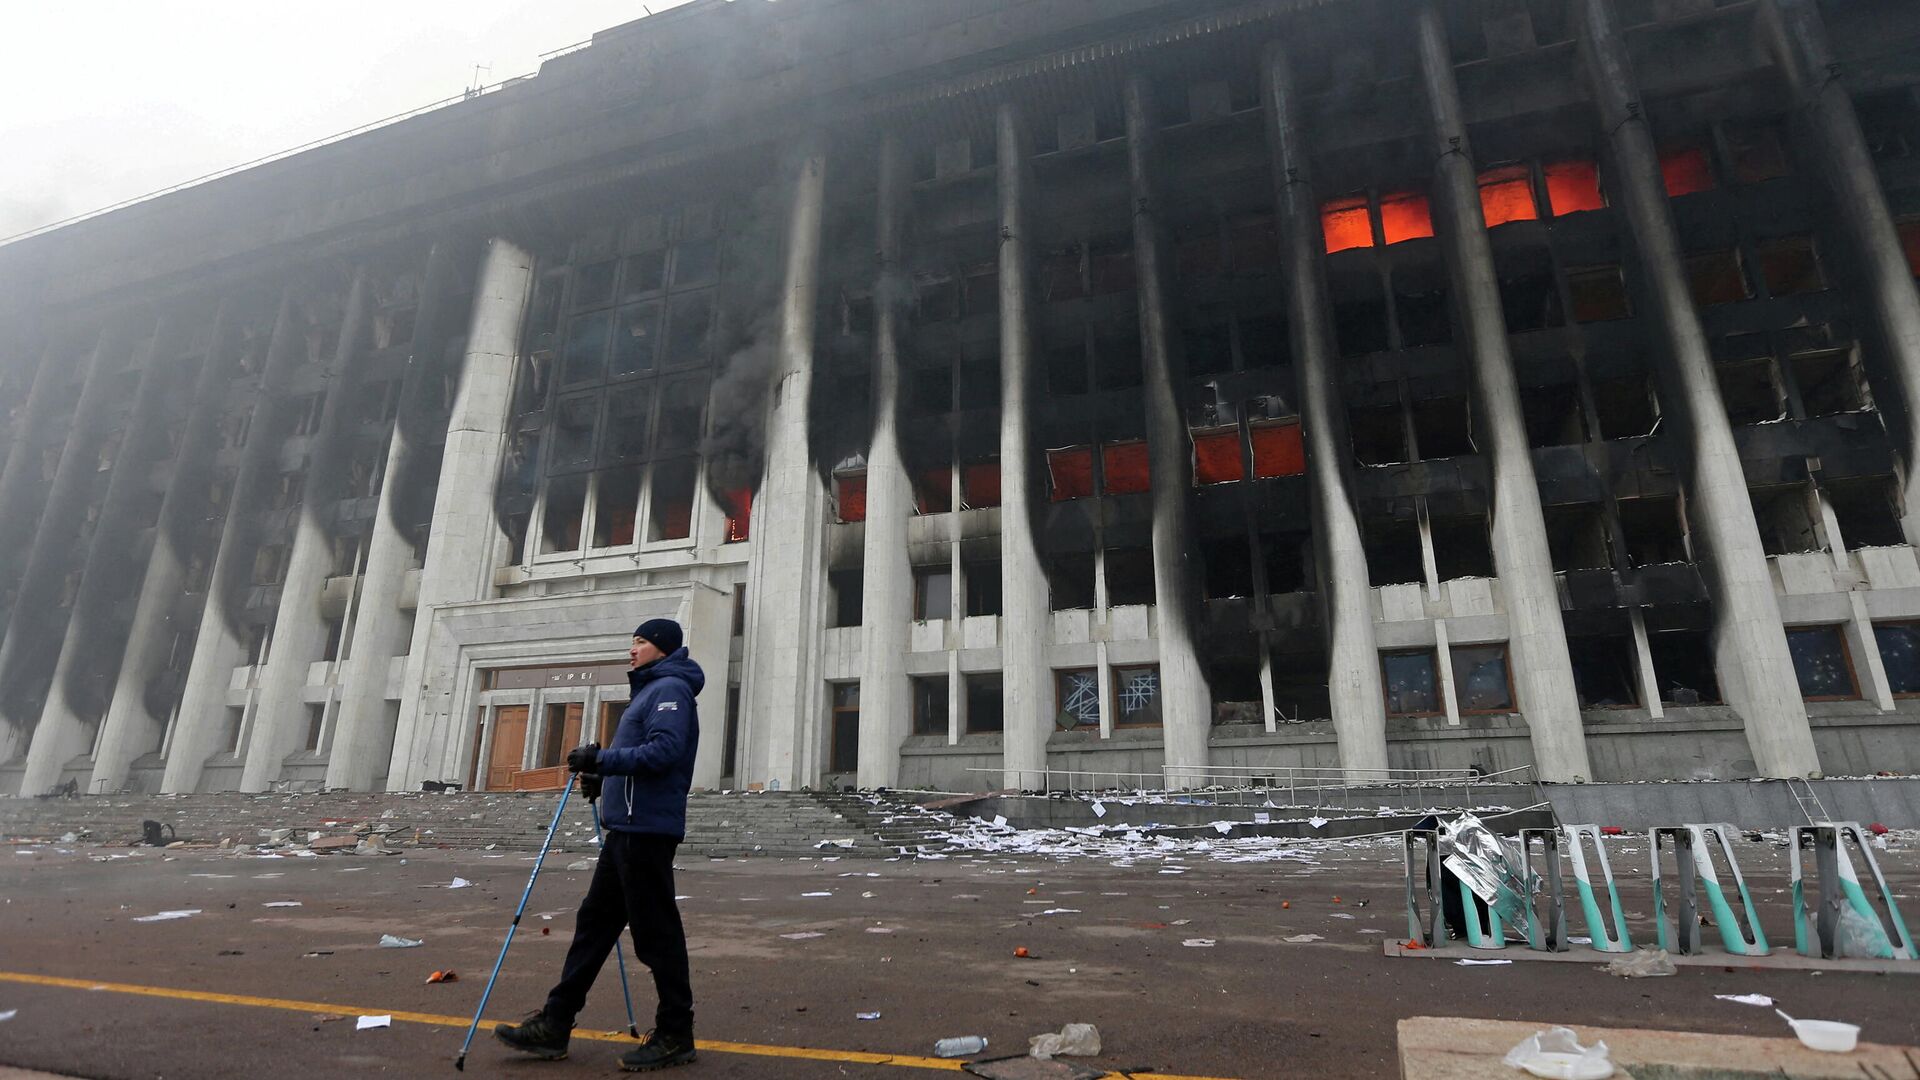 A man stands in front of the mayor's office building which was torched during protests triggered by fuel price increase in Almaty, Kazakhstan January 6, 2022 - Sputnik International, 1920, 14.01.2022